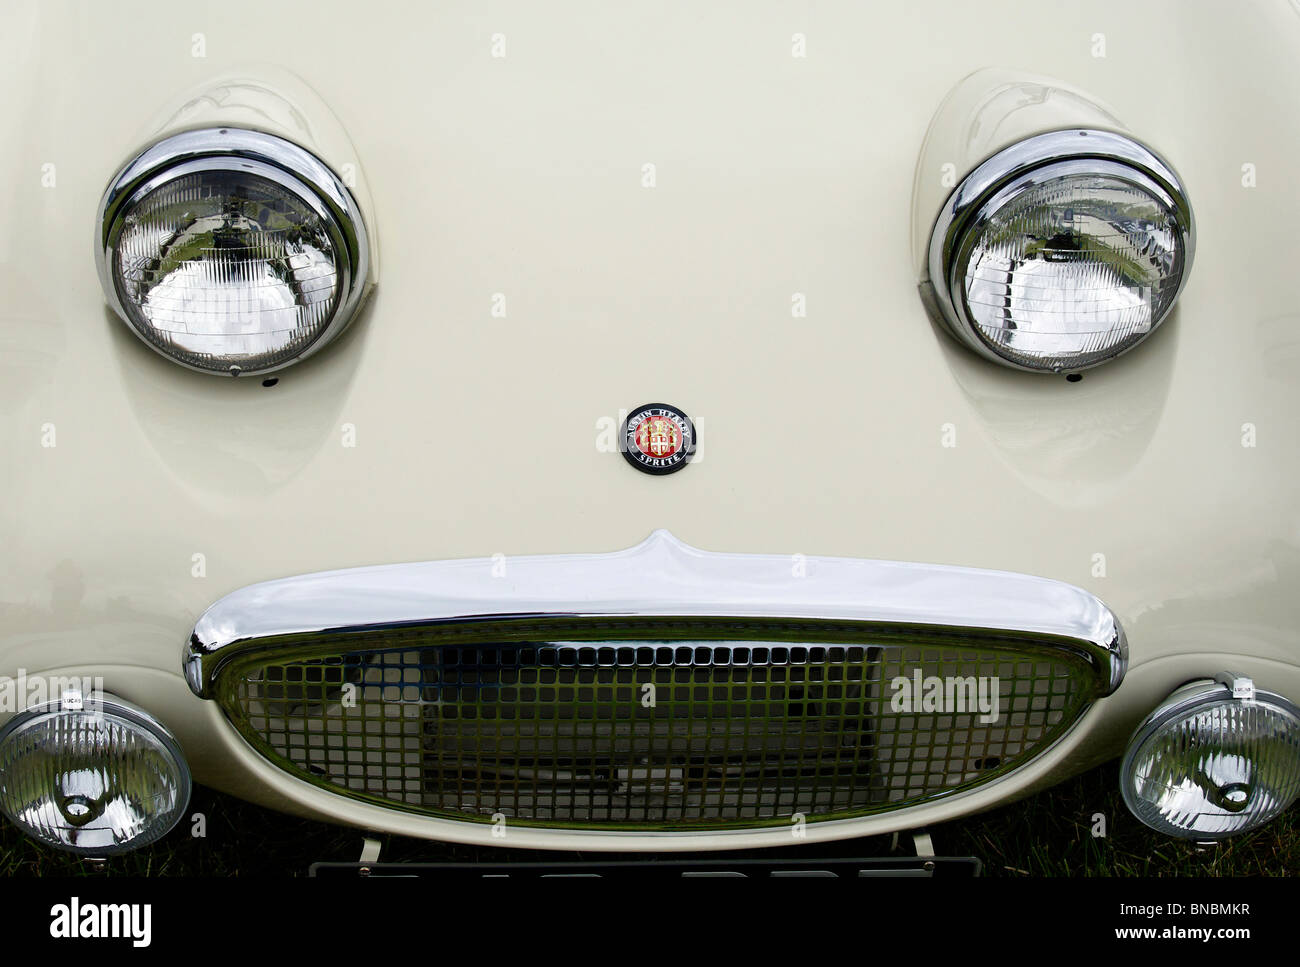 'Frog Eyed' Austin Sprite looking like a smiling face Stock Photo